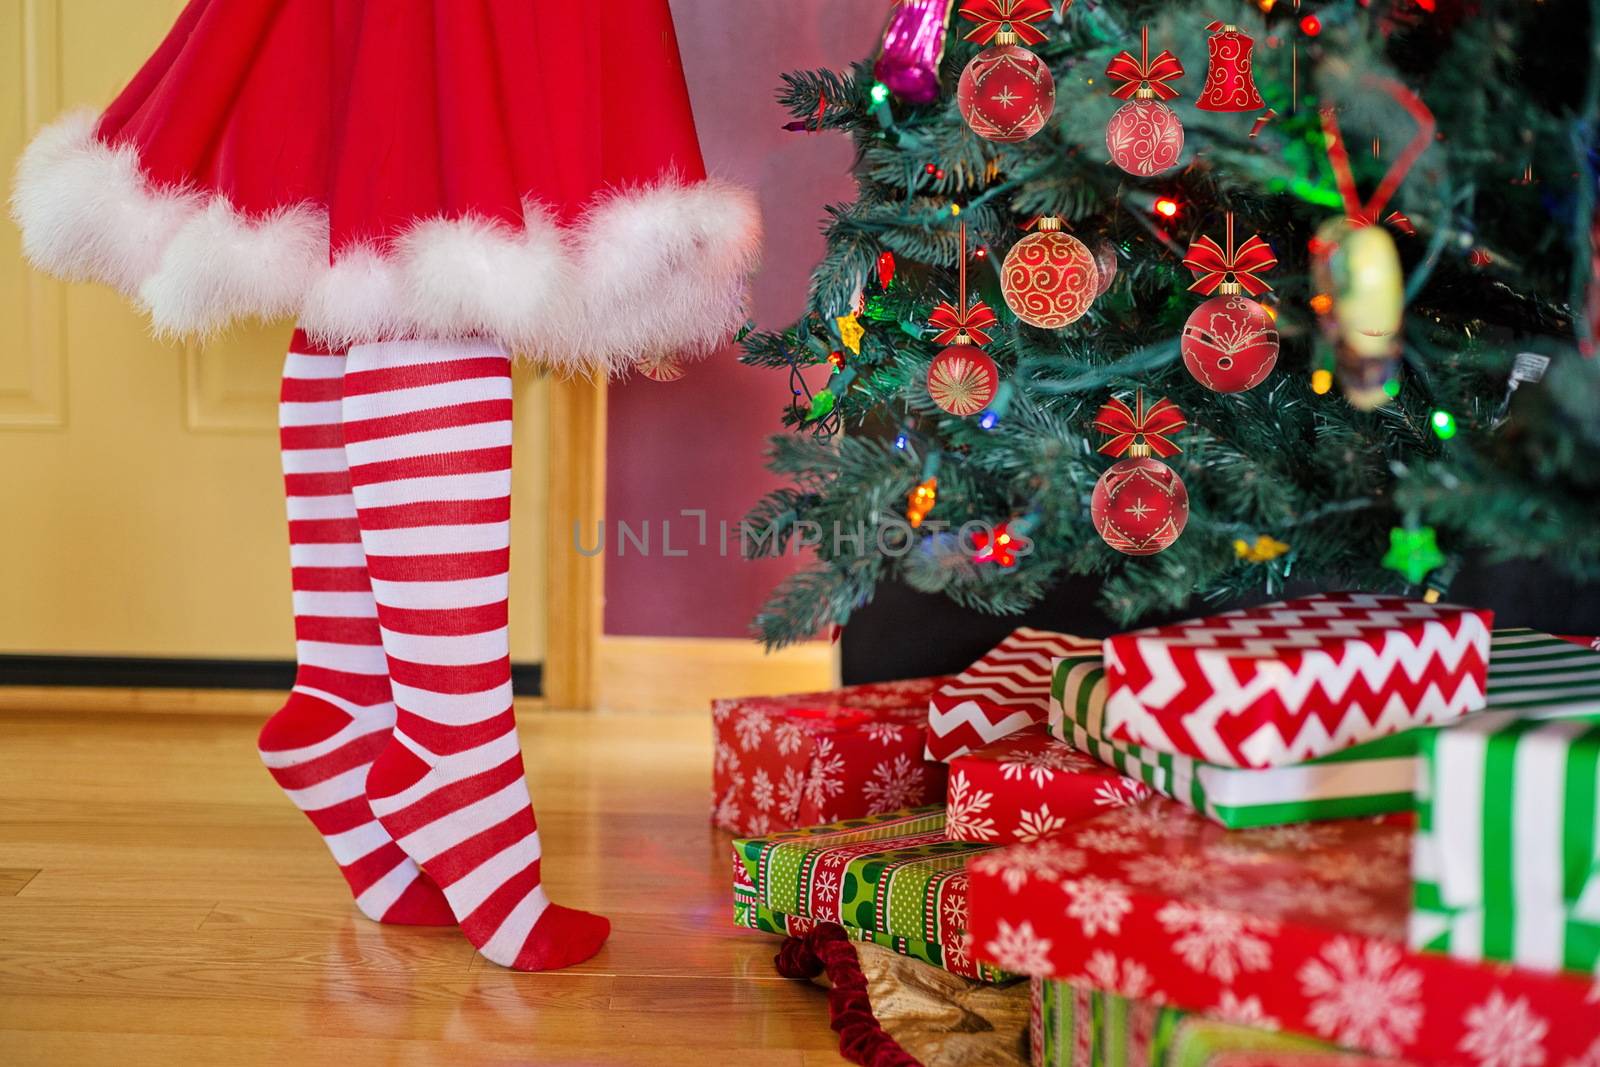 In images Christmas characters snow maiden. Girl in a Christmas costume decorates the Christmas tree